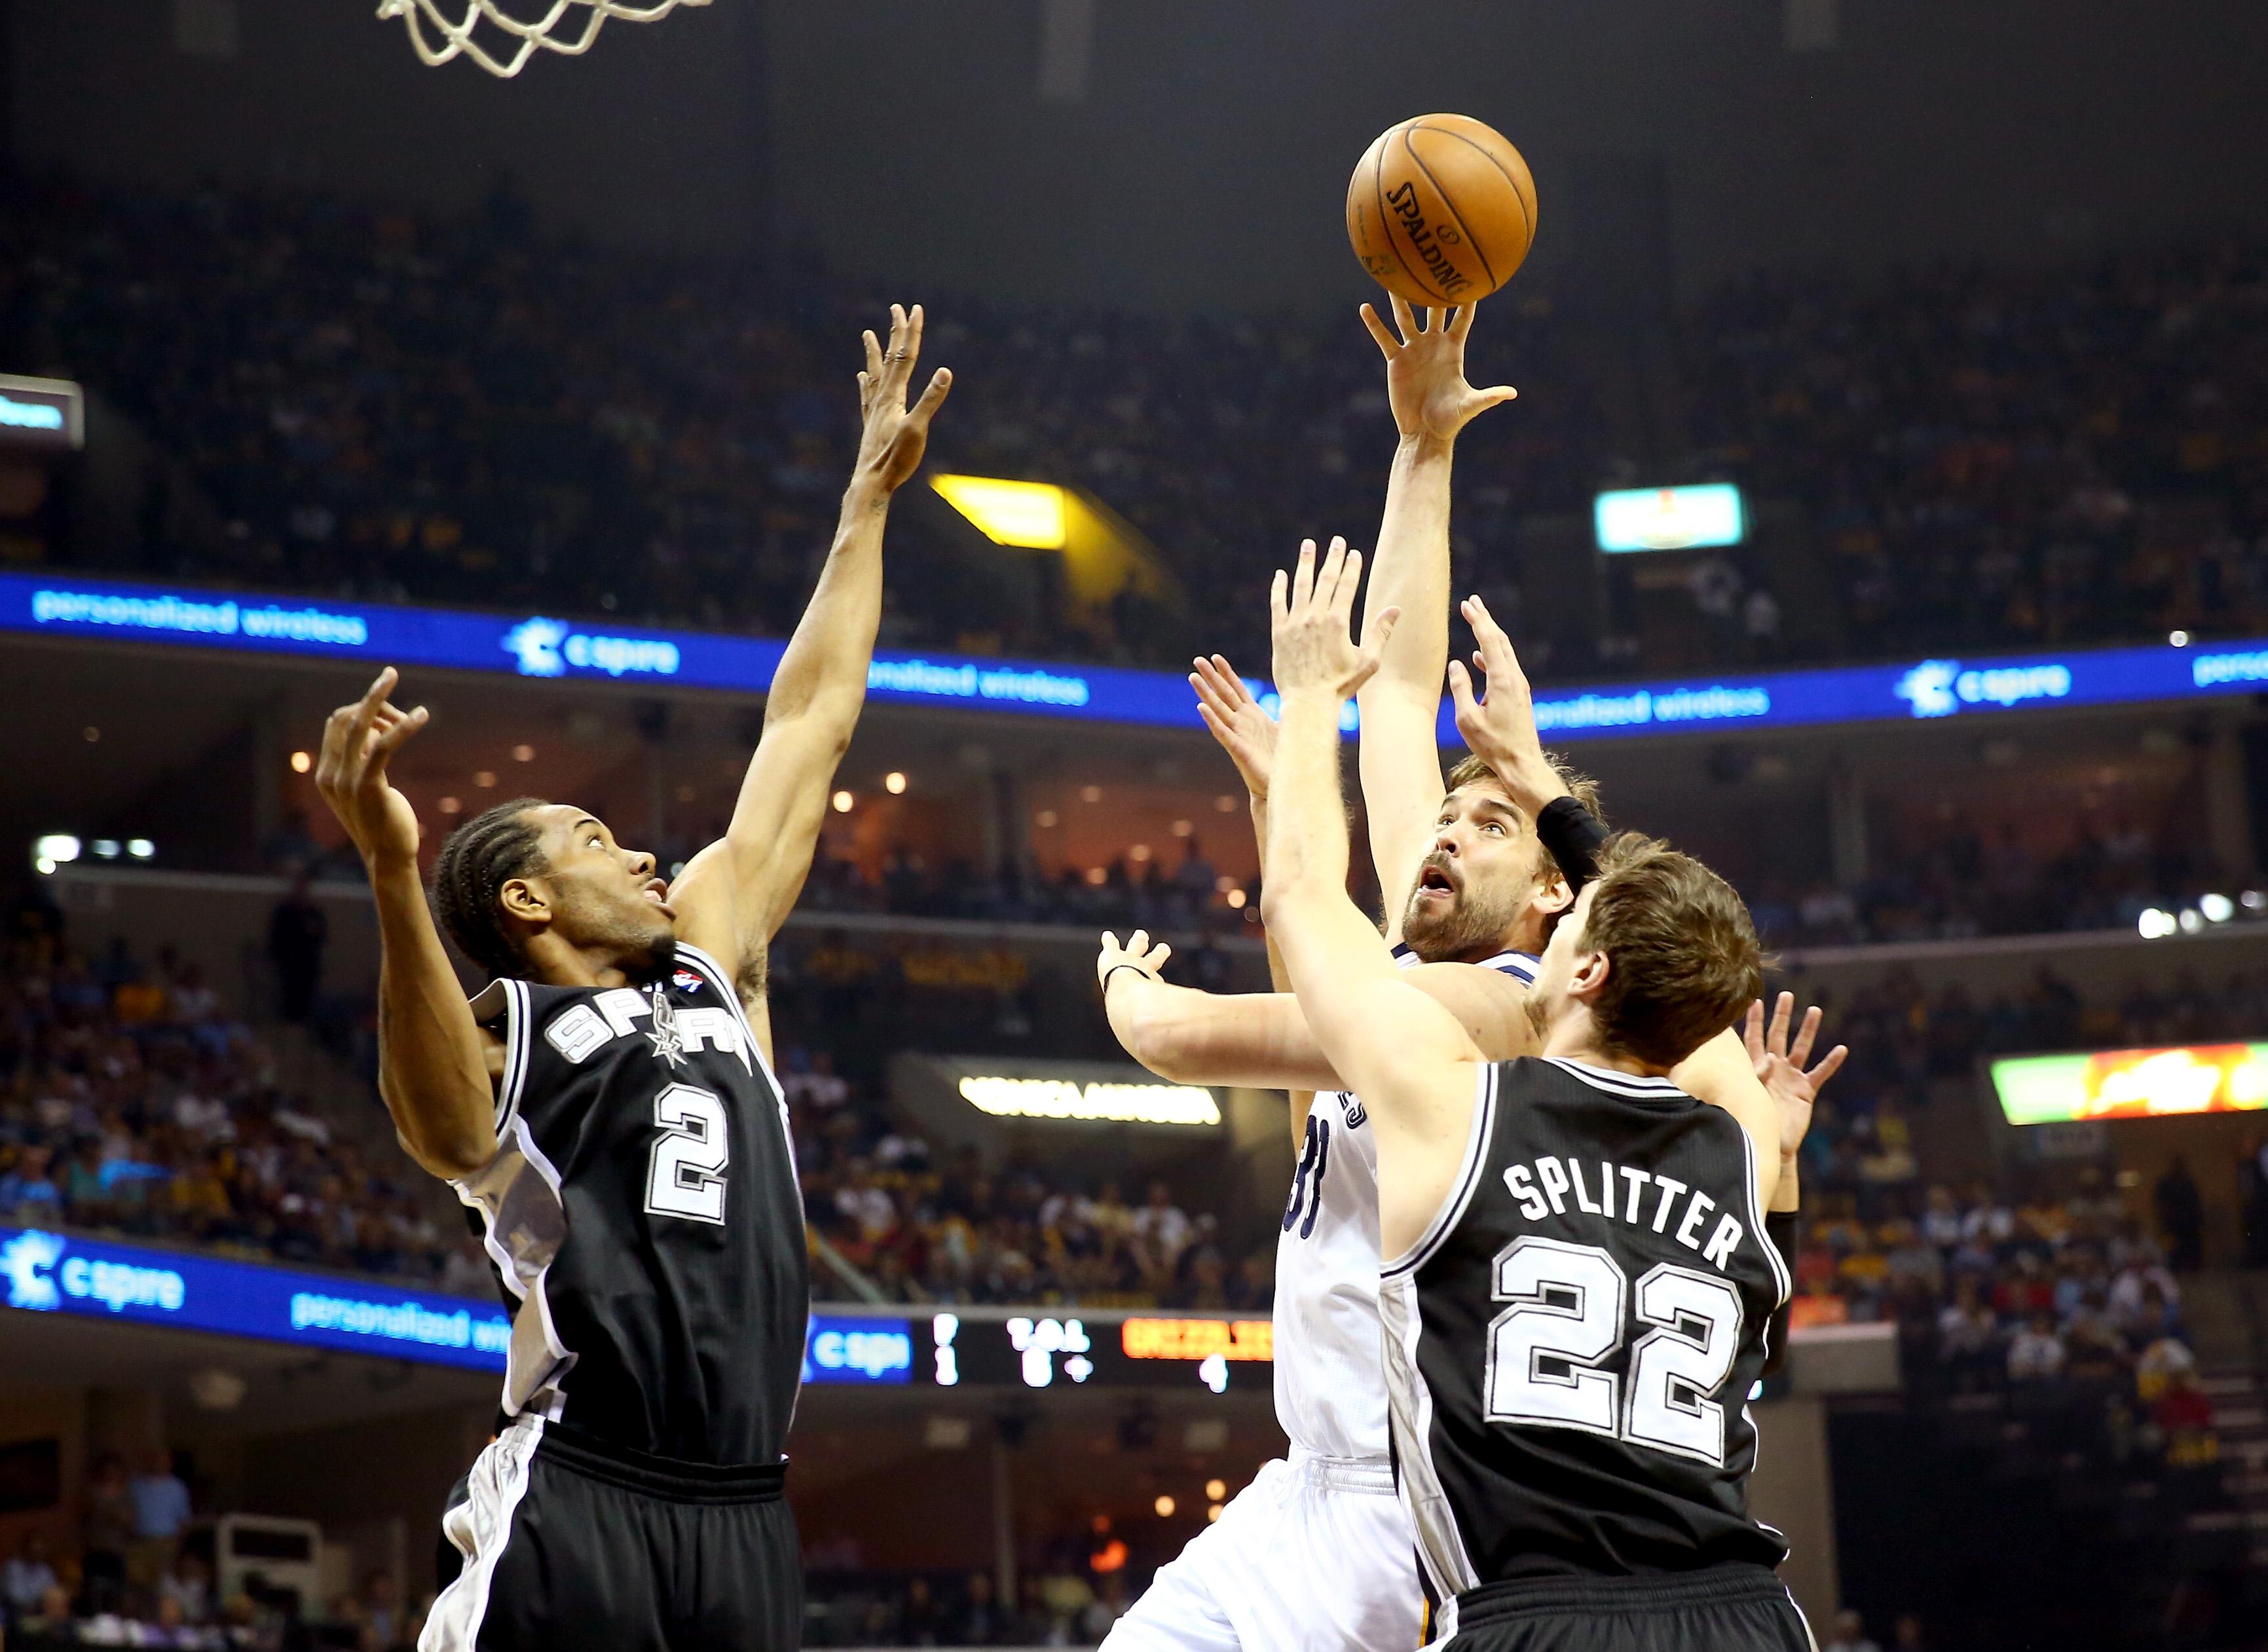 Marc Gasol, No. 33 of the Memphis Grizzlies, goes up for a shot against Tiago Splitter, No. 22 and Kawhi Leonard, No. 2 of the San Antonio Spurs, in the first quarter during Game 4 of the Western Conference Finals of the 2013 NBA Playoffs at the FedExForum on May 27, 2013, in Memphis, Tenn.